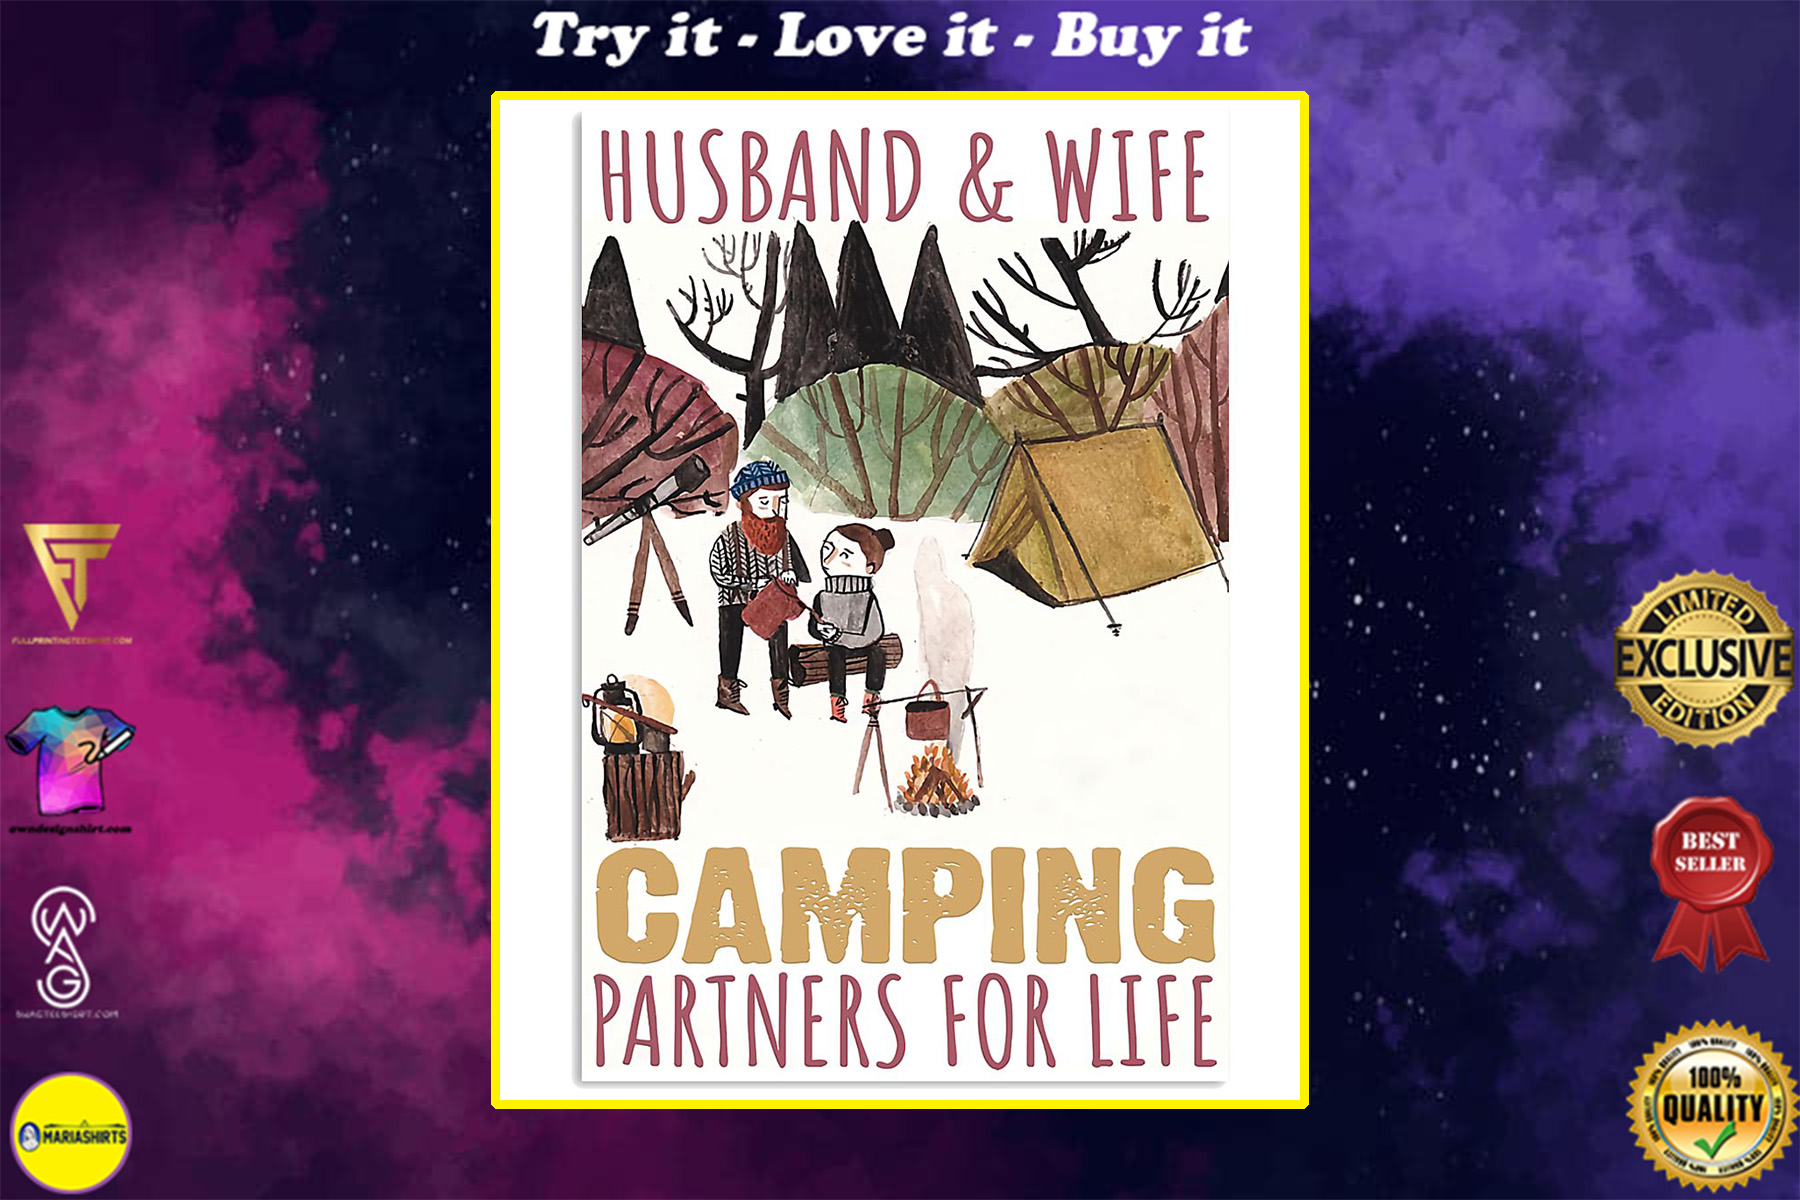 husband and wife camping partners for life poster